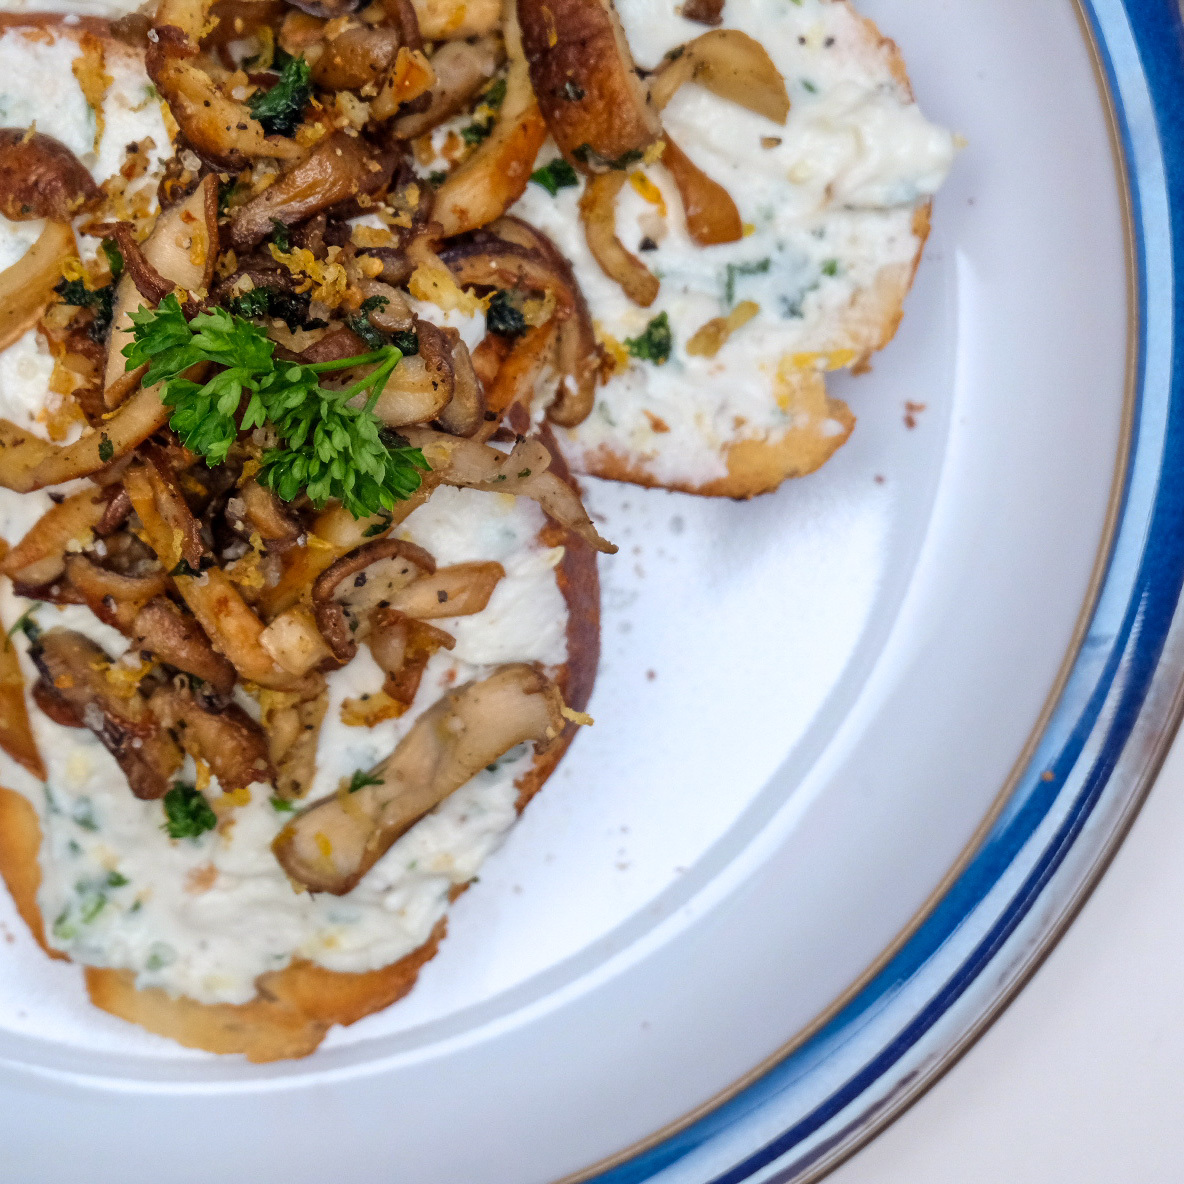 Sautéd mushrooms with whipped goats cheese on toast